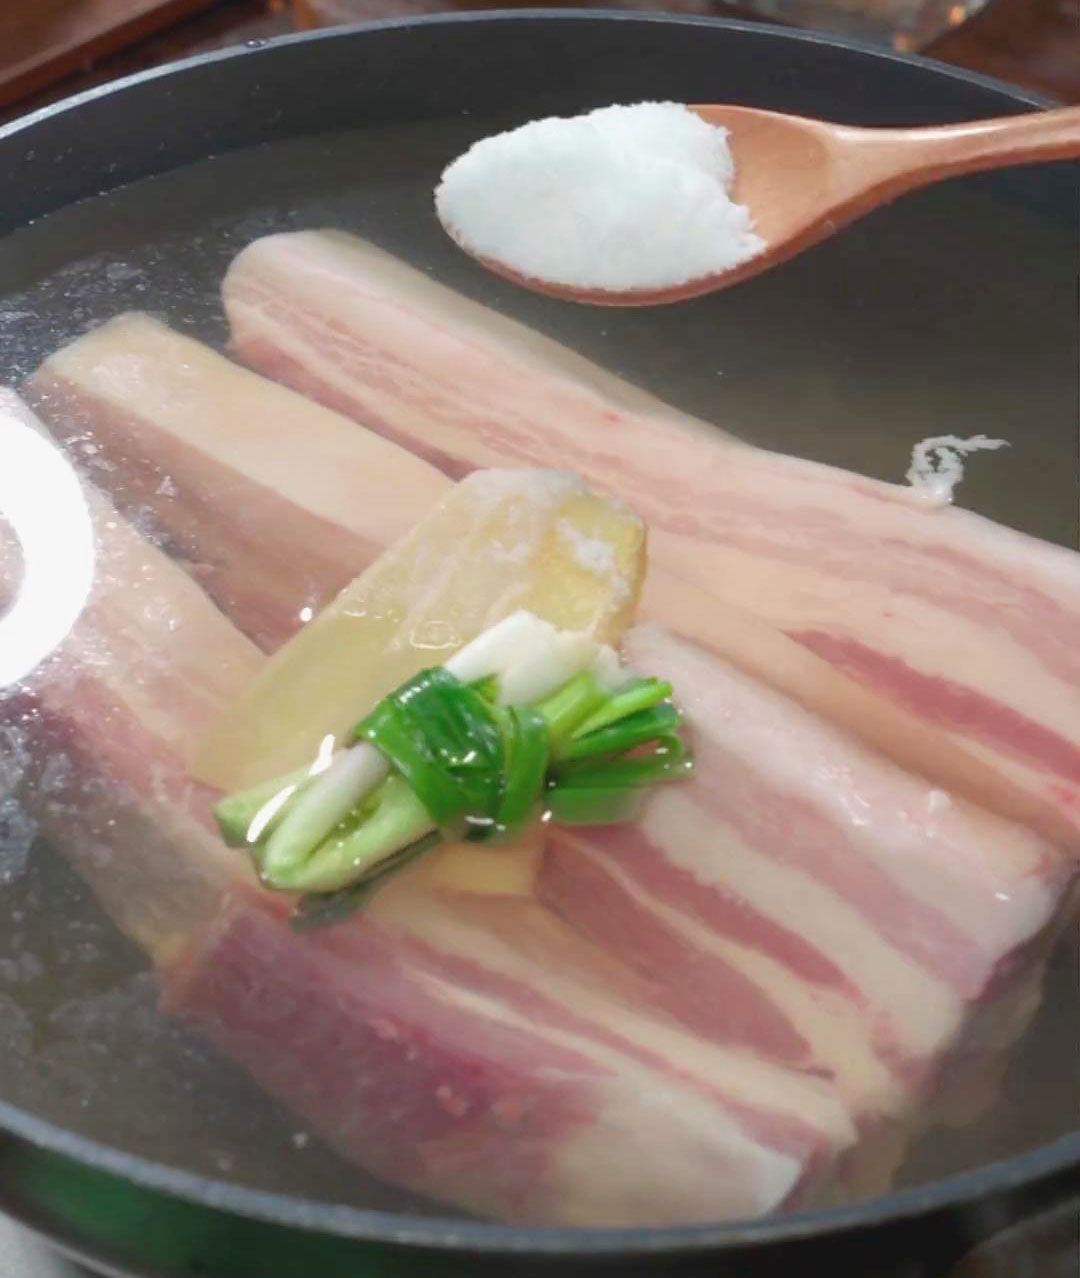 Place the pork belly in the pot along with green onions, ginger slices, cooking wine, and a pinch of salt